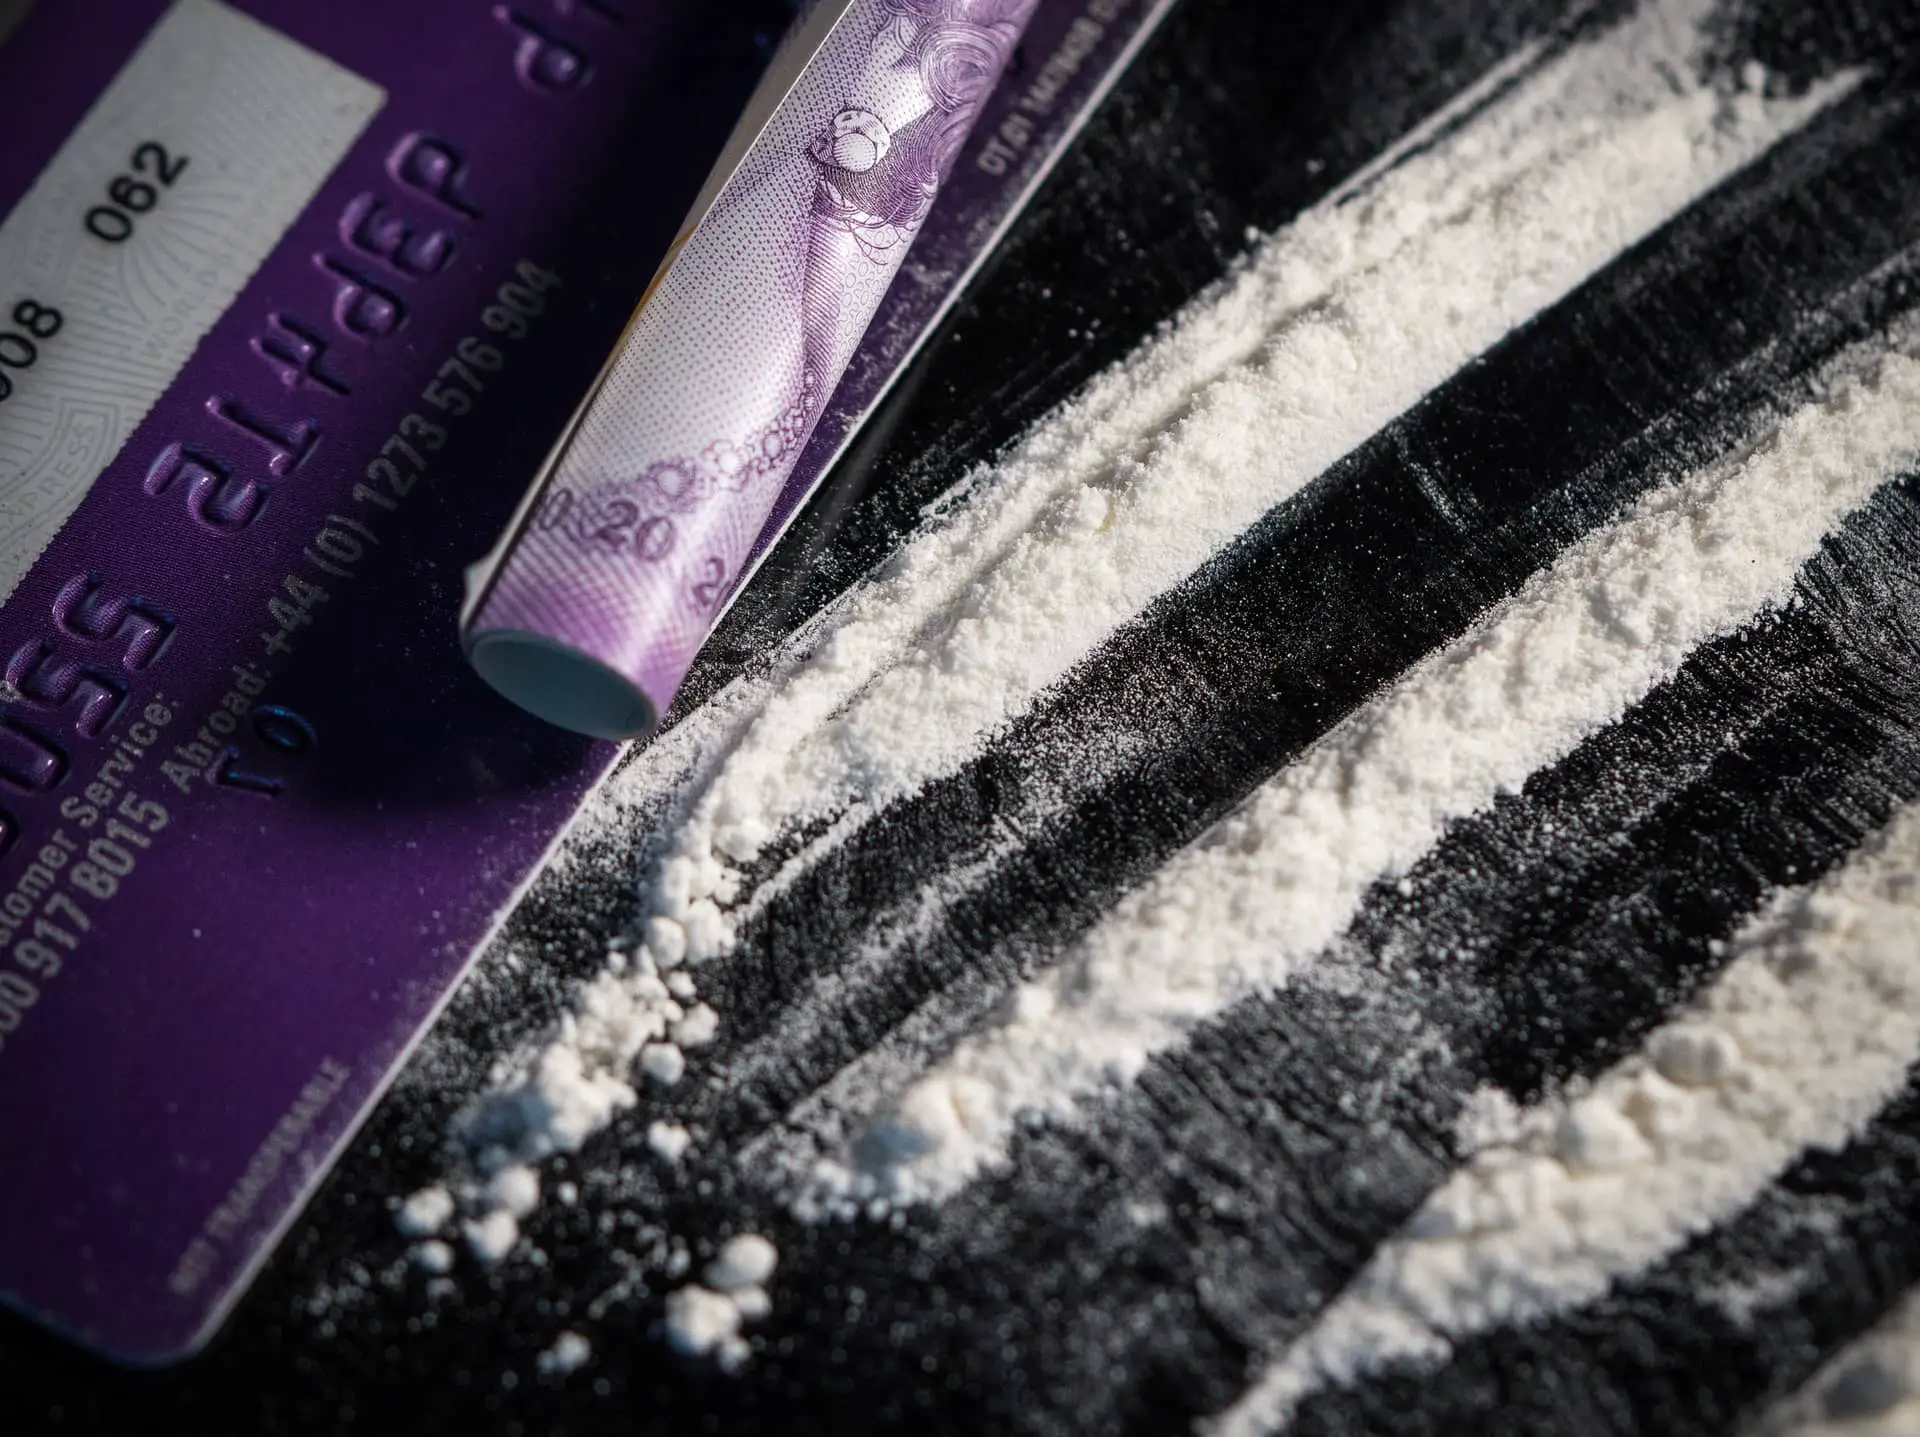 Lines of cocaine, a rolled up bank note and credit card